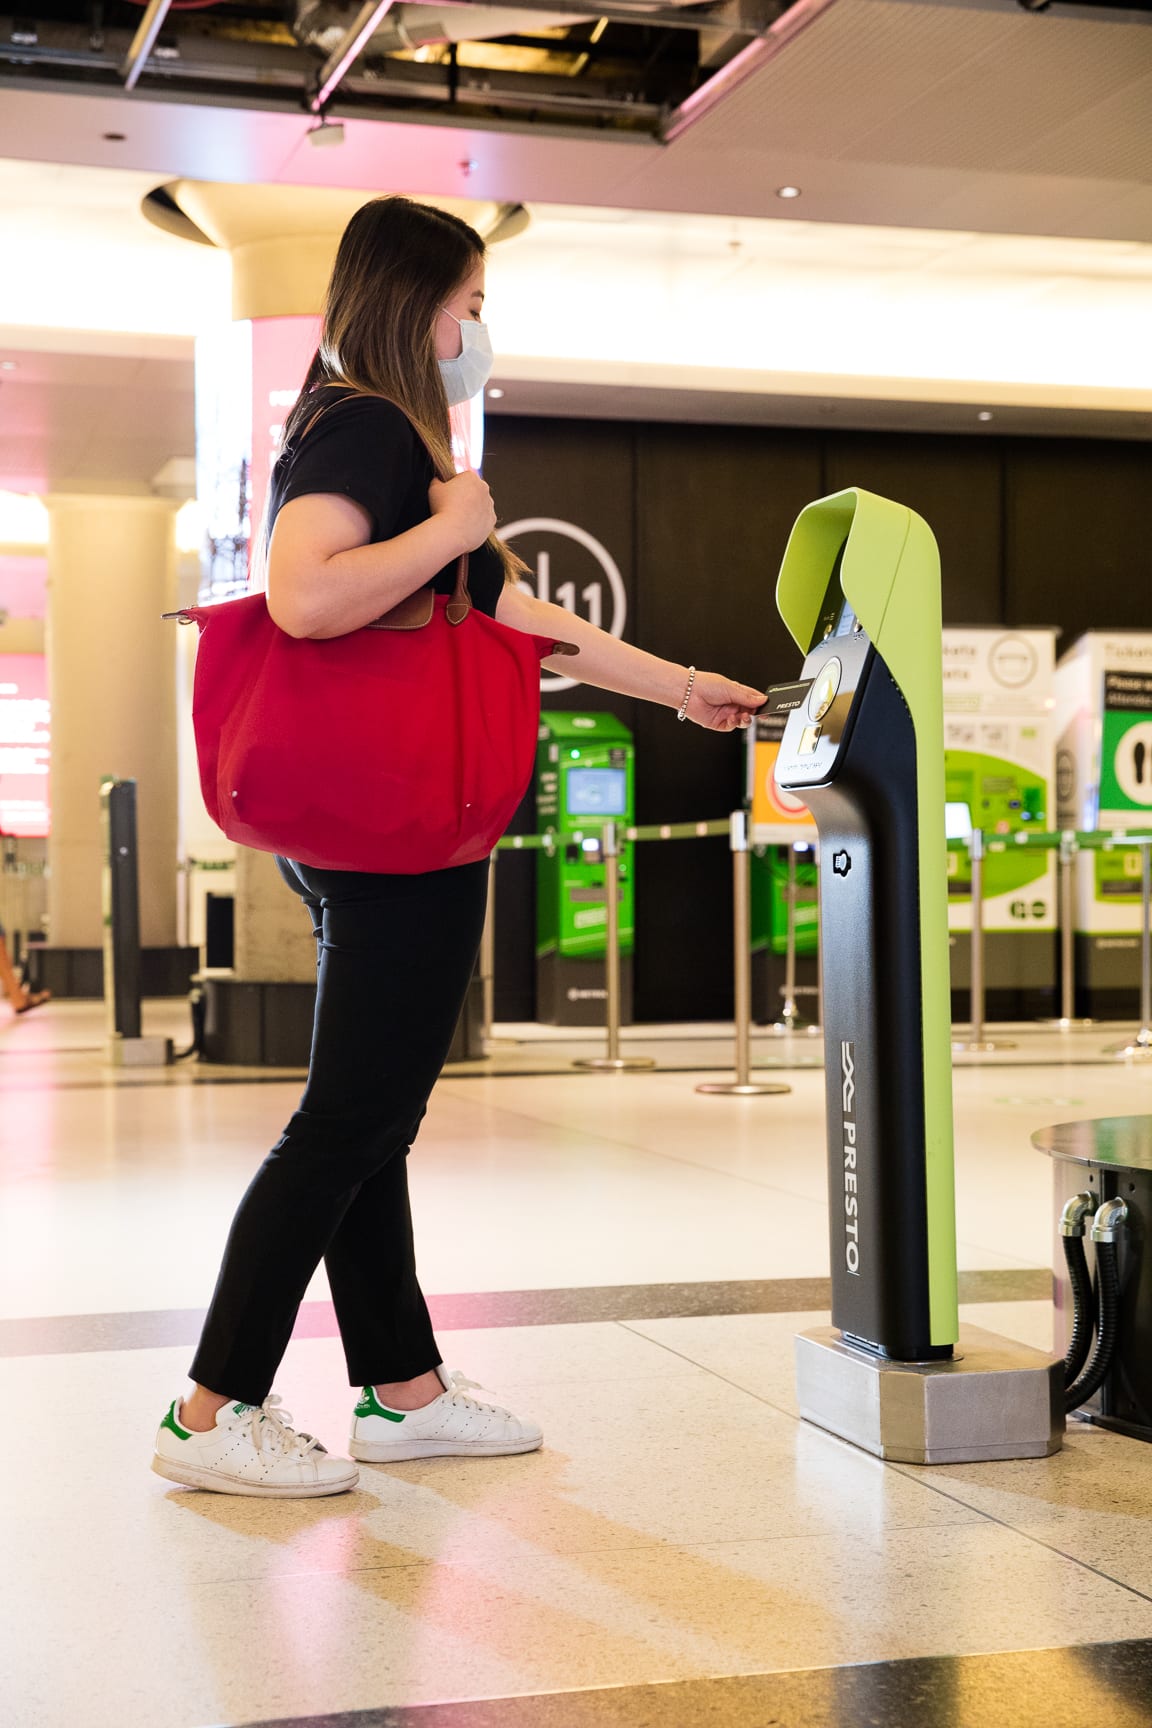 GO customer tapping their PRESTO card at Union Station